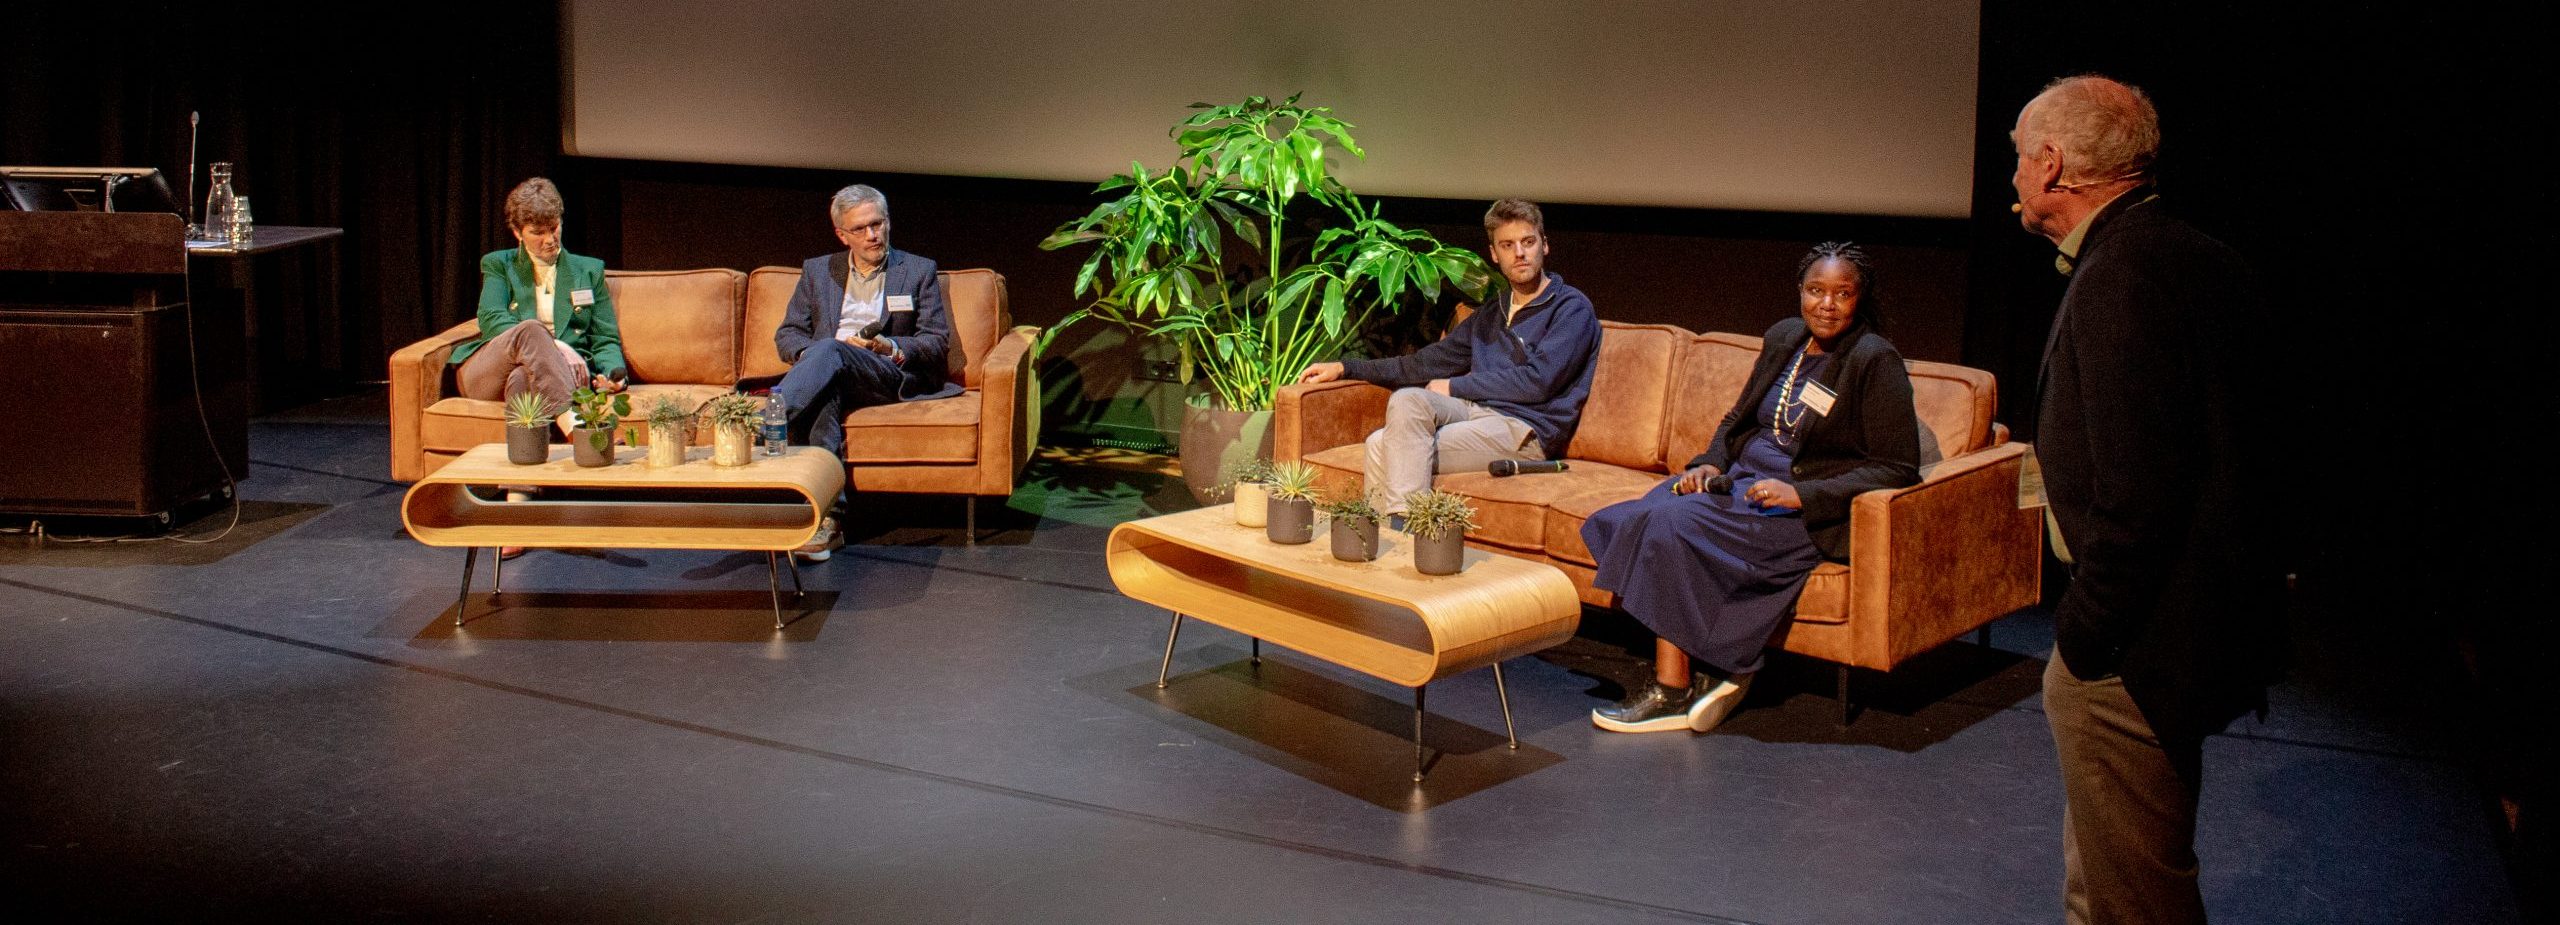 Joep Lange Chair and Fellows symposium provides platform for new interdisciplinary research